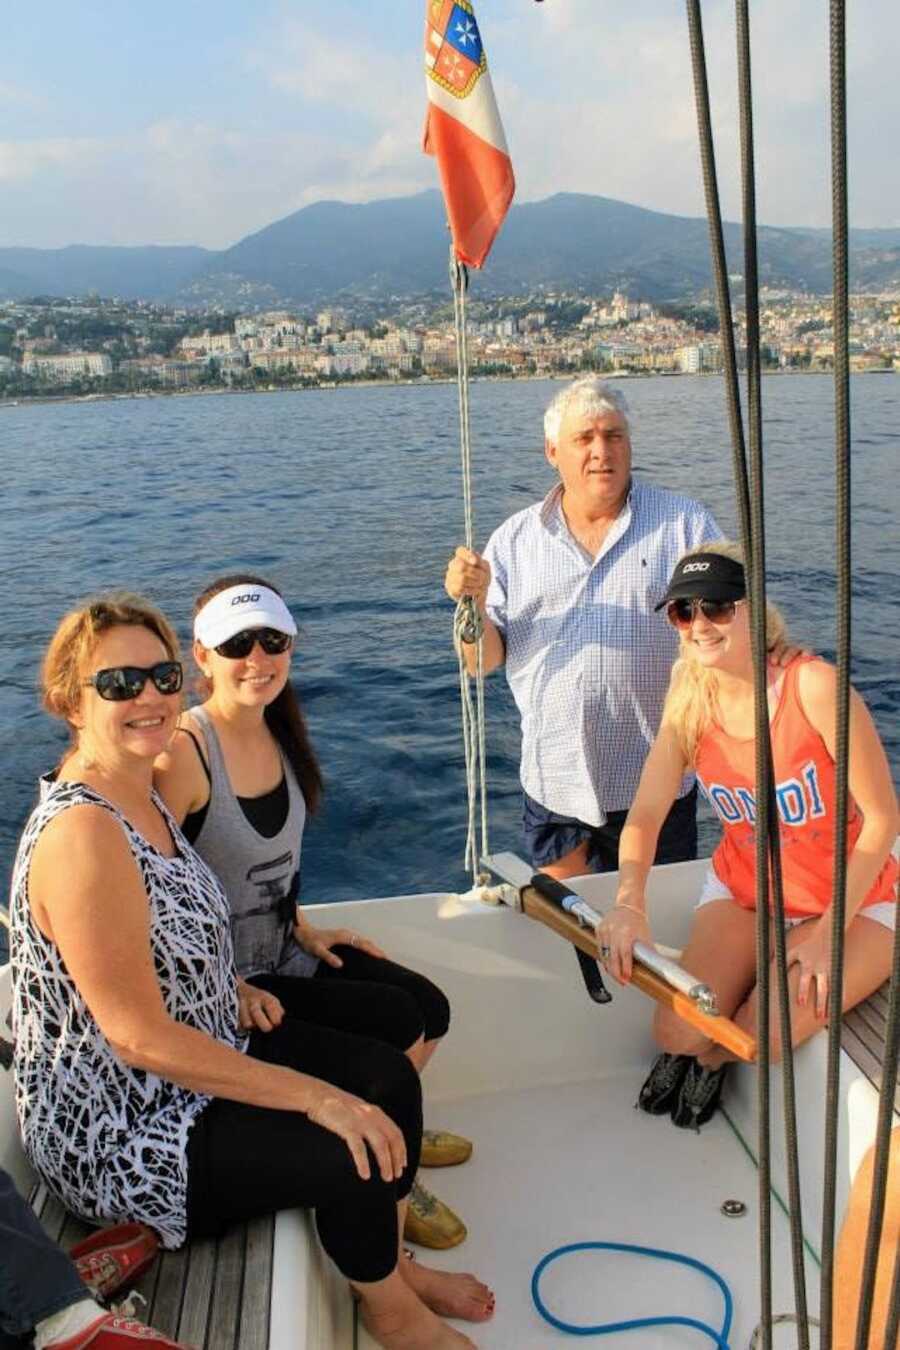 diabetic woman with her family on a boat in the ocean